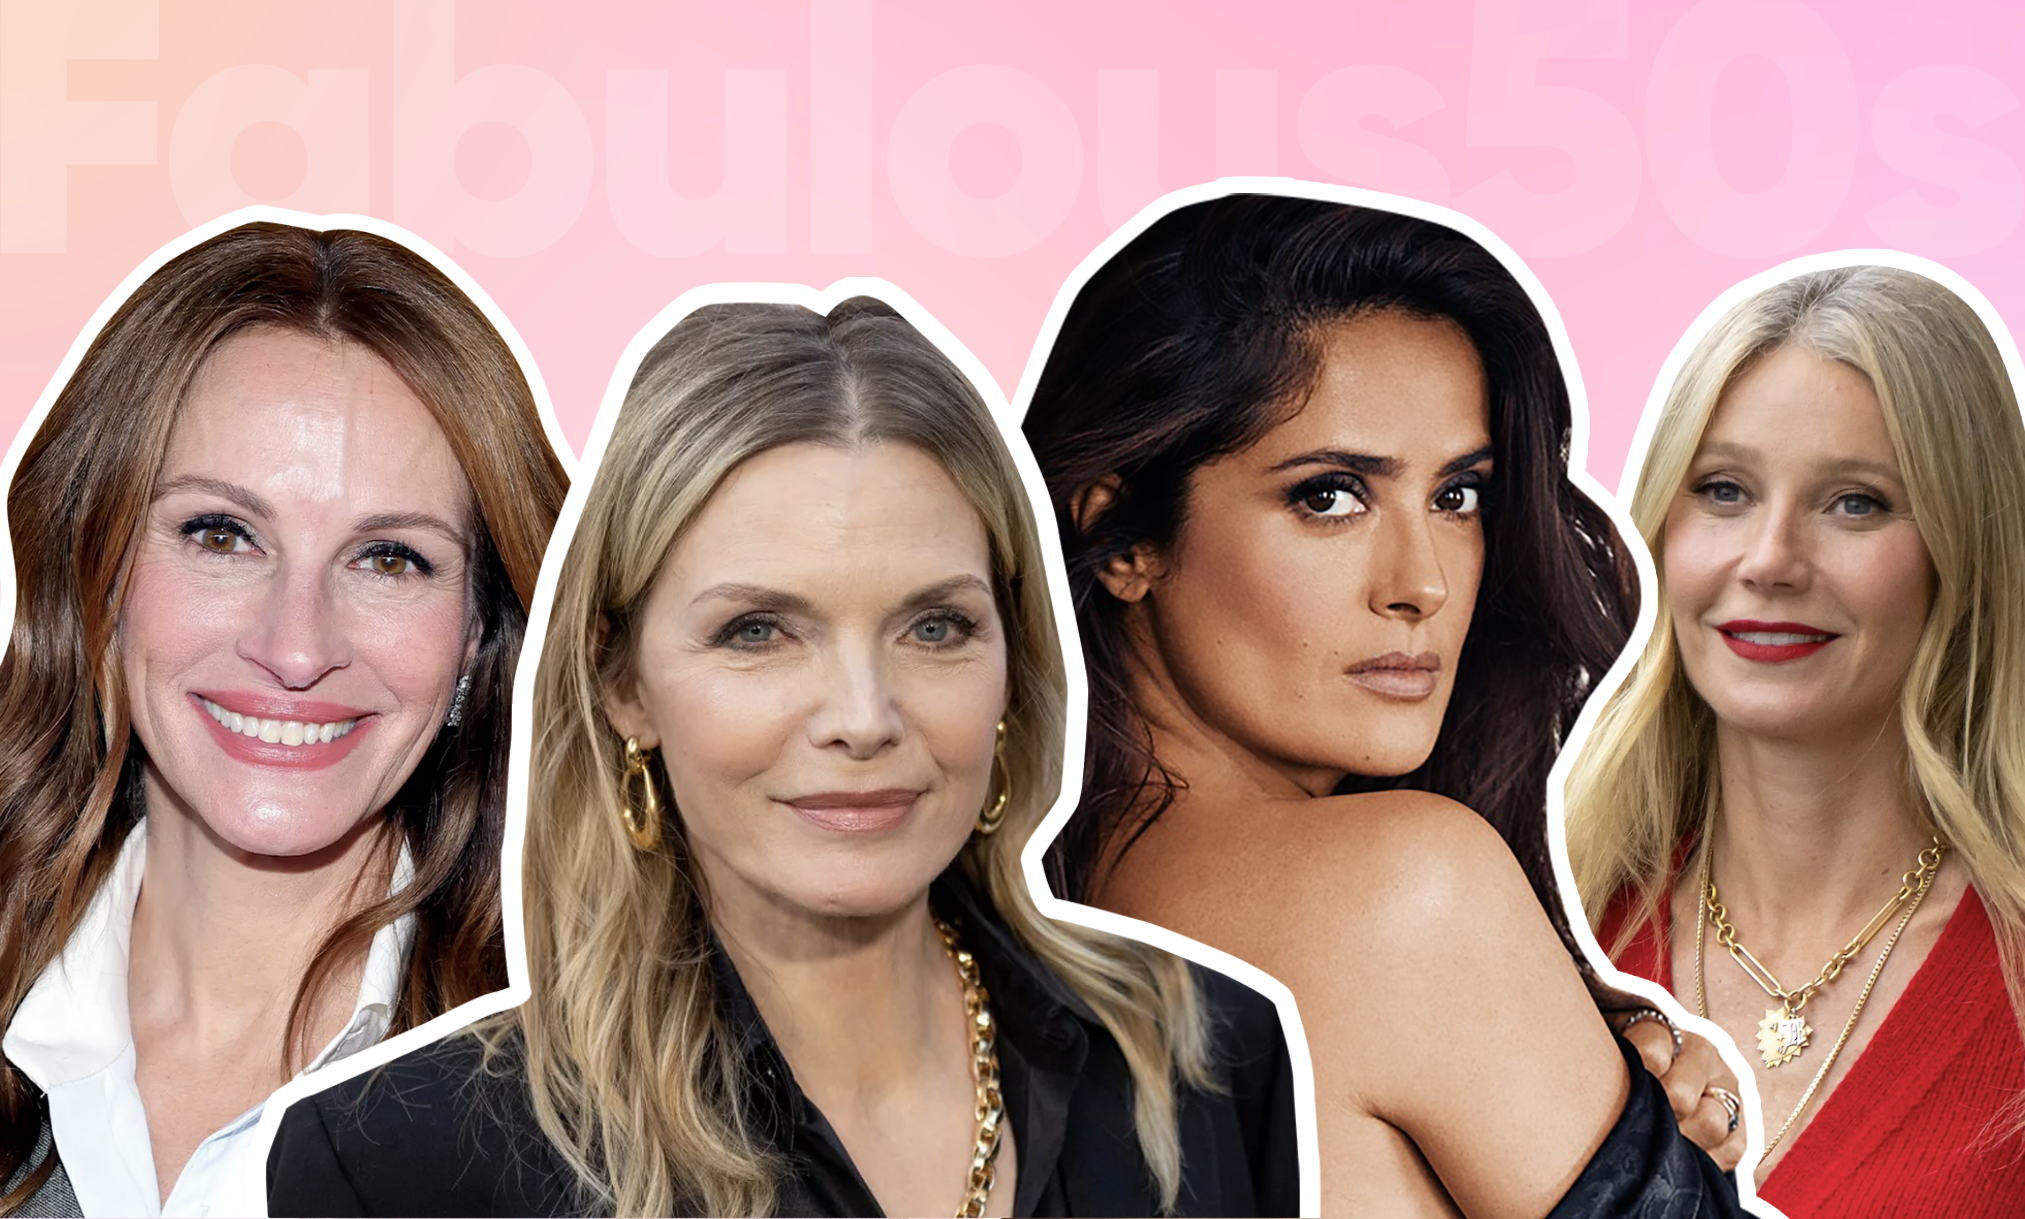 youthful skincare tips from celebrities over 50